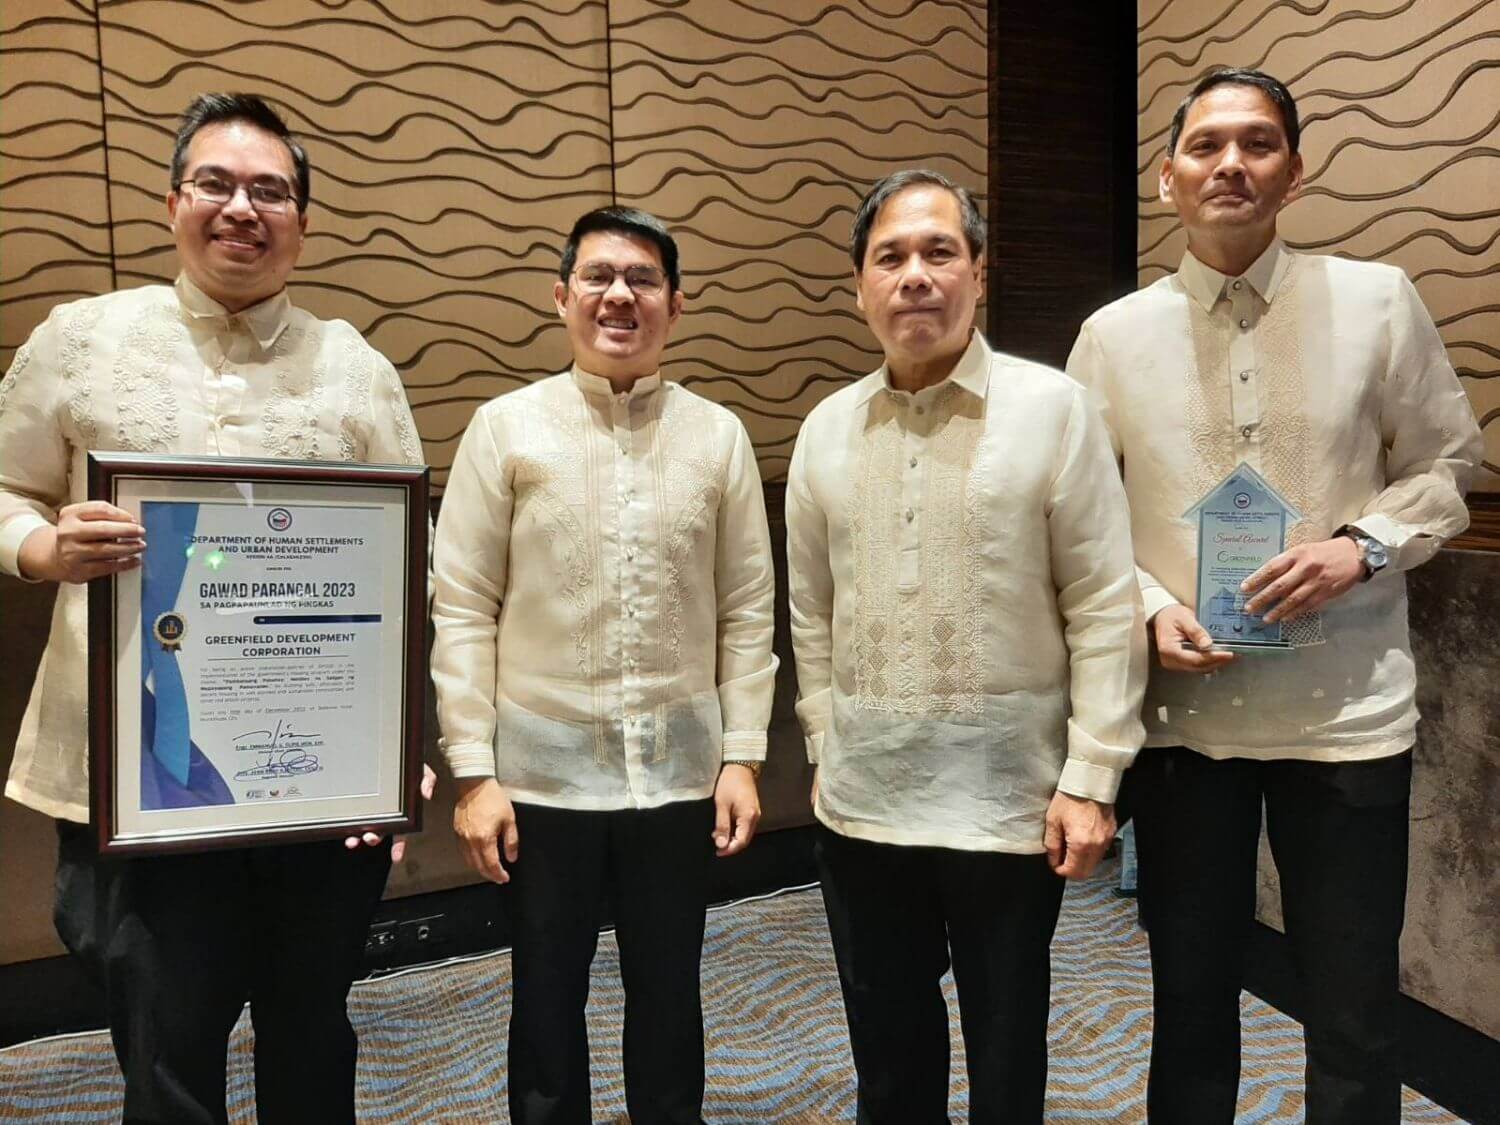 From left to right, Mr. Martin C. de Leon, AVP and Head Condo Divisions of GDC, Eng. Emmanuel Glipo, Director Chief of HREDRD, Atty. Jann Roby Ortero of GDC, and Benjamin Joseph Afable, GIRMI VP Property Head